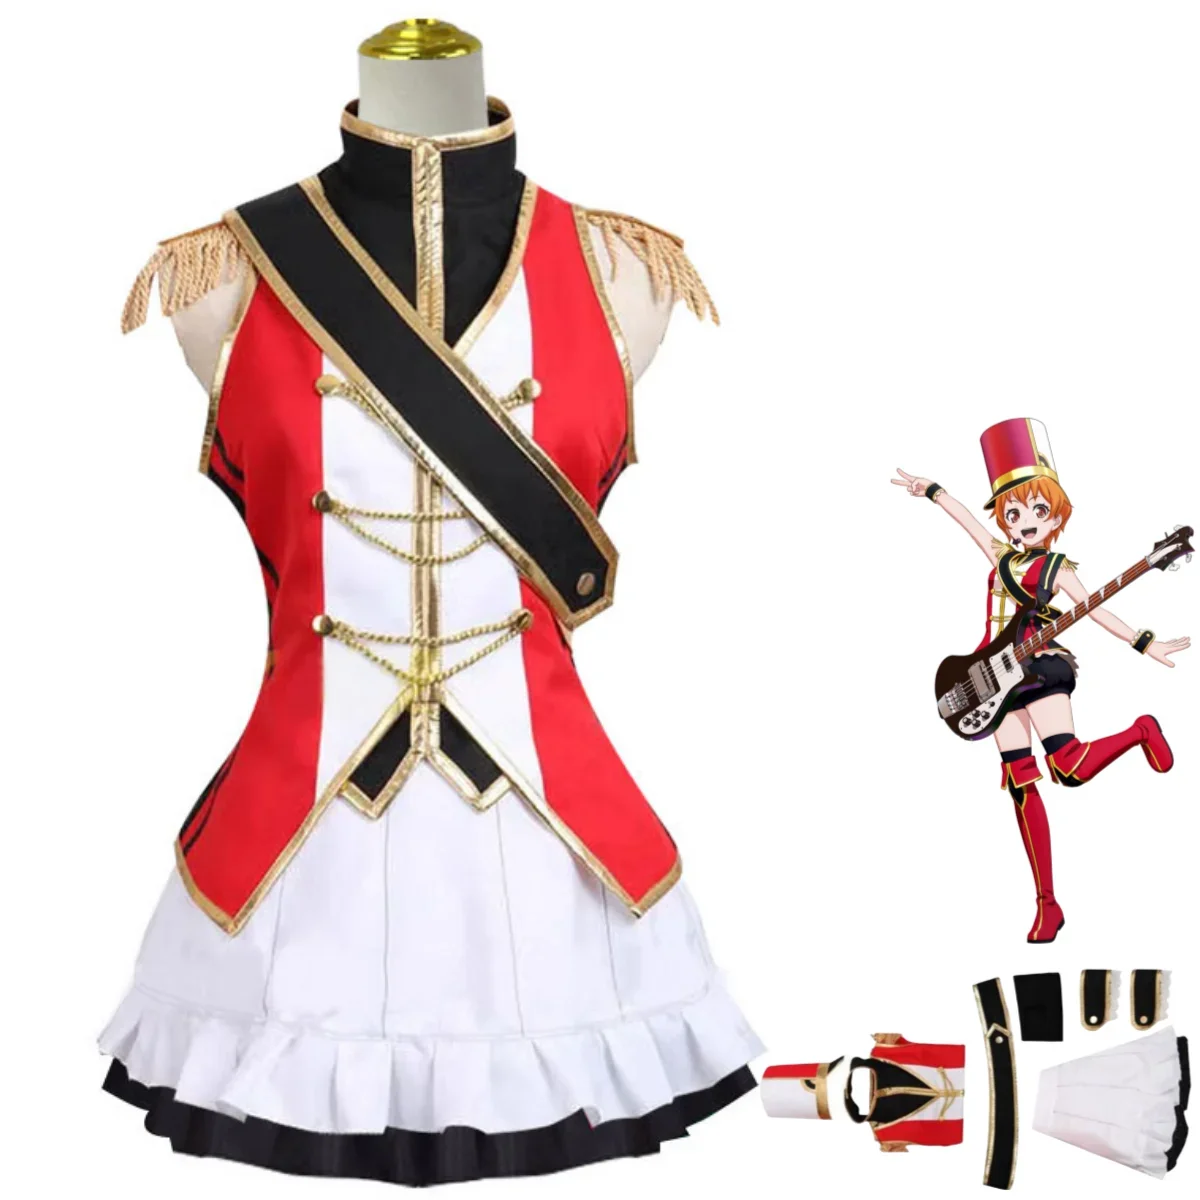 

Anime BanG Dream Captain Cosplay Costume Hello, Happy World! Team Leader Red Uniform Skirt Woman Sexy Kawaii Carnival Suit